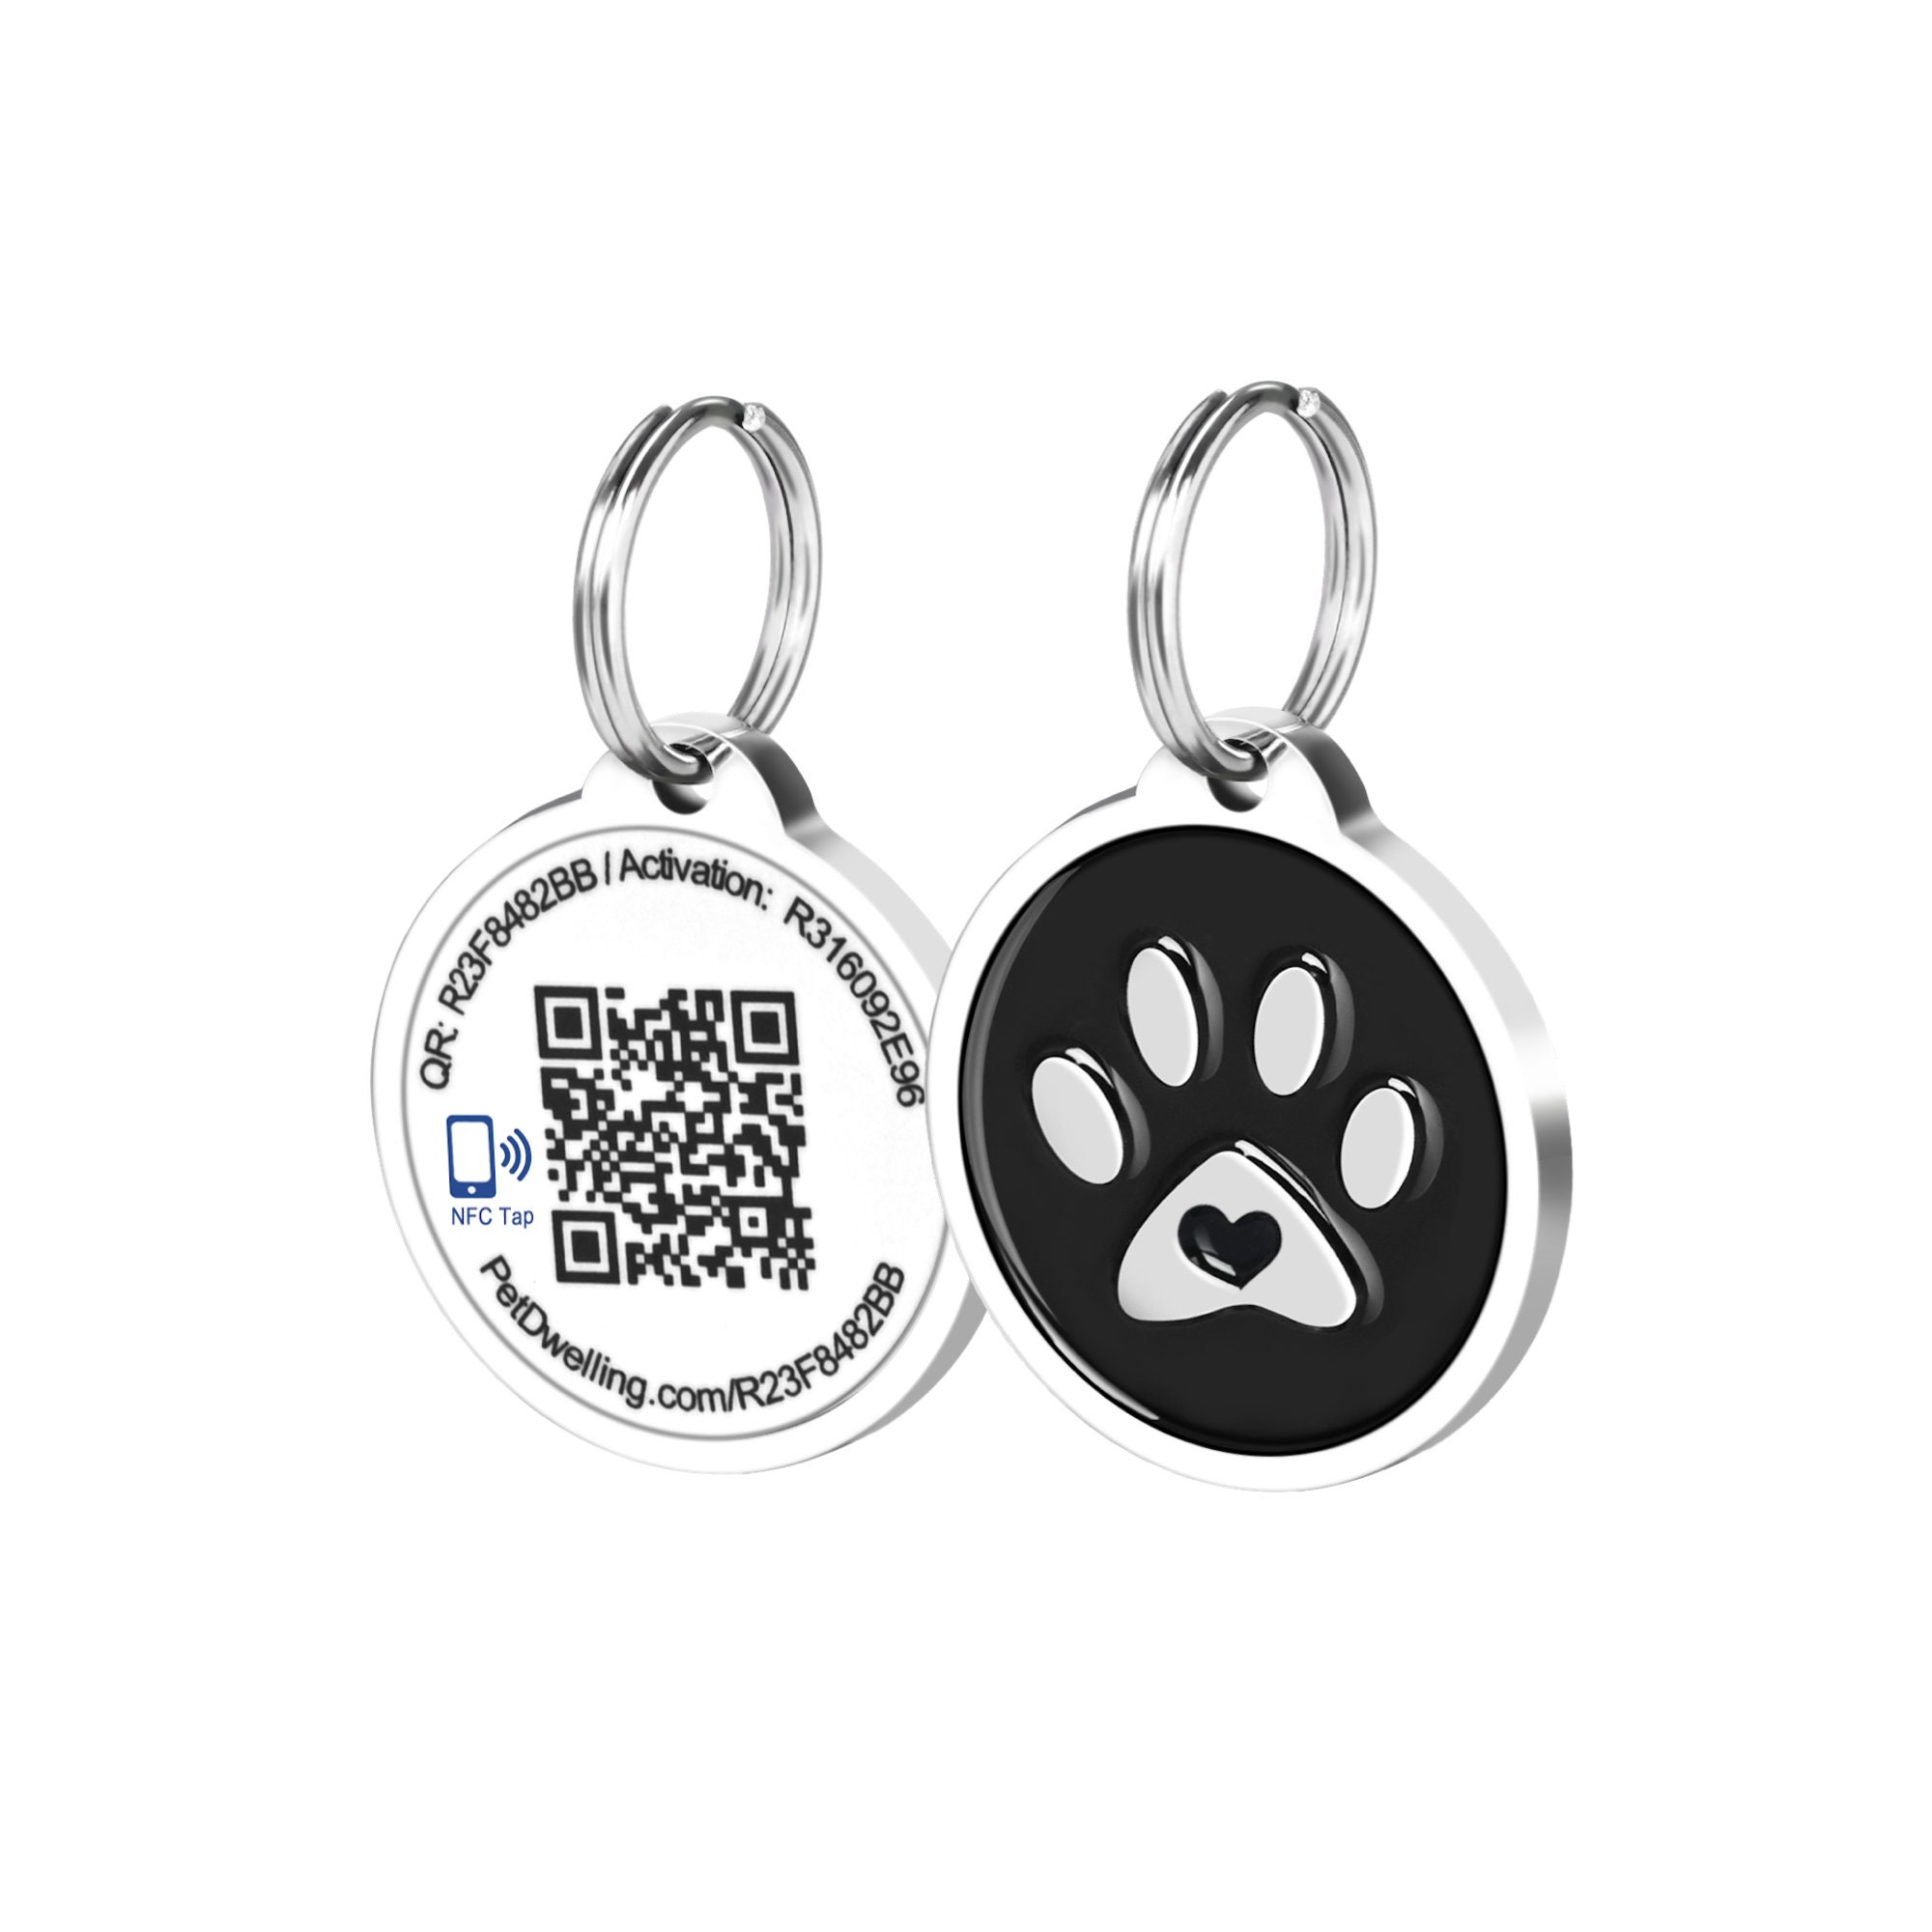 Introducing Ring Pet Tag | Easy-to-use tag with QR code | Real-time scan  alerts | Shareable Pet Profile | No subscription or fees